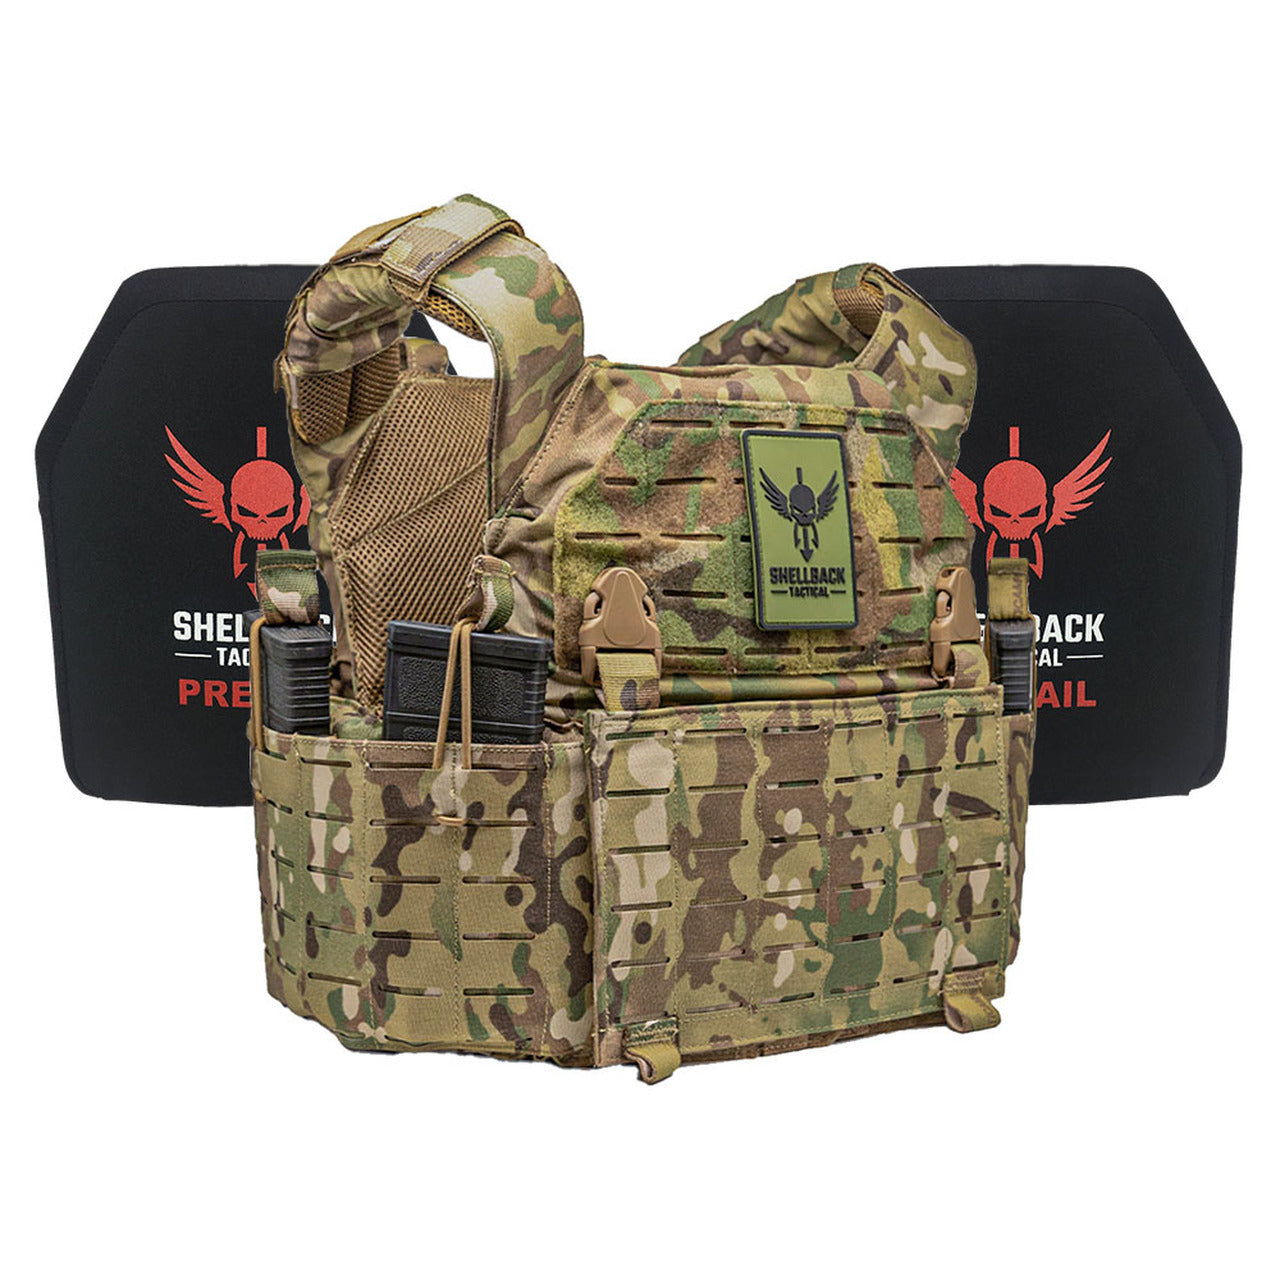 A Shellback Tactical Rampage 2.0 Active Shooter Kit with Level III Single Curve 10 x 12 Hard Armor plate carrier with a holster on it.